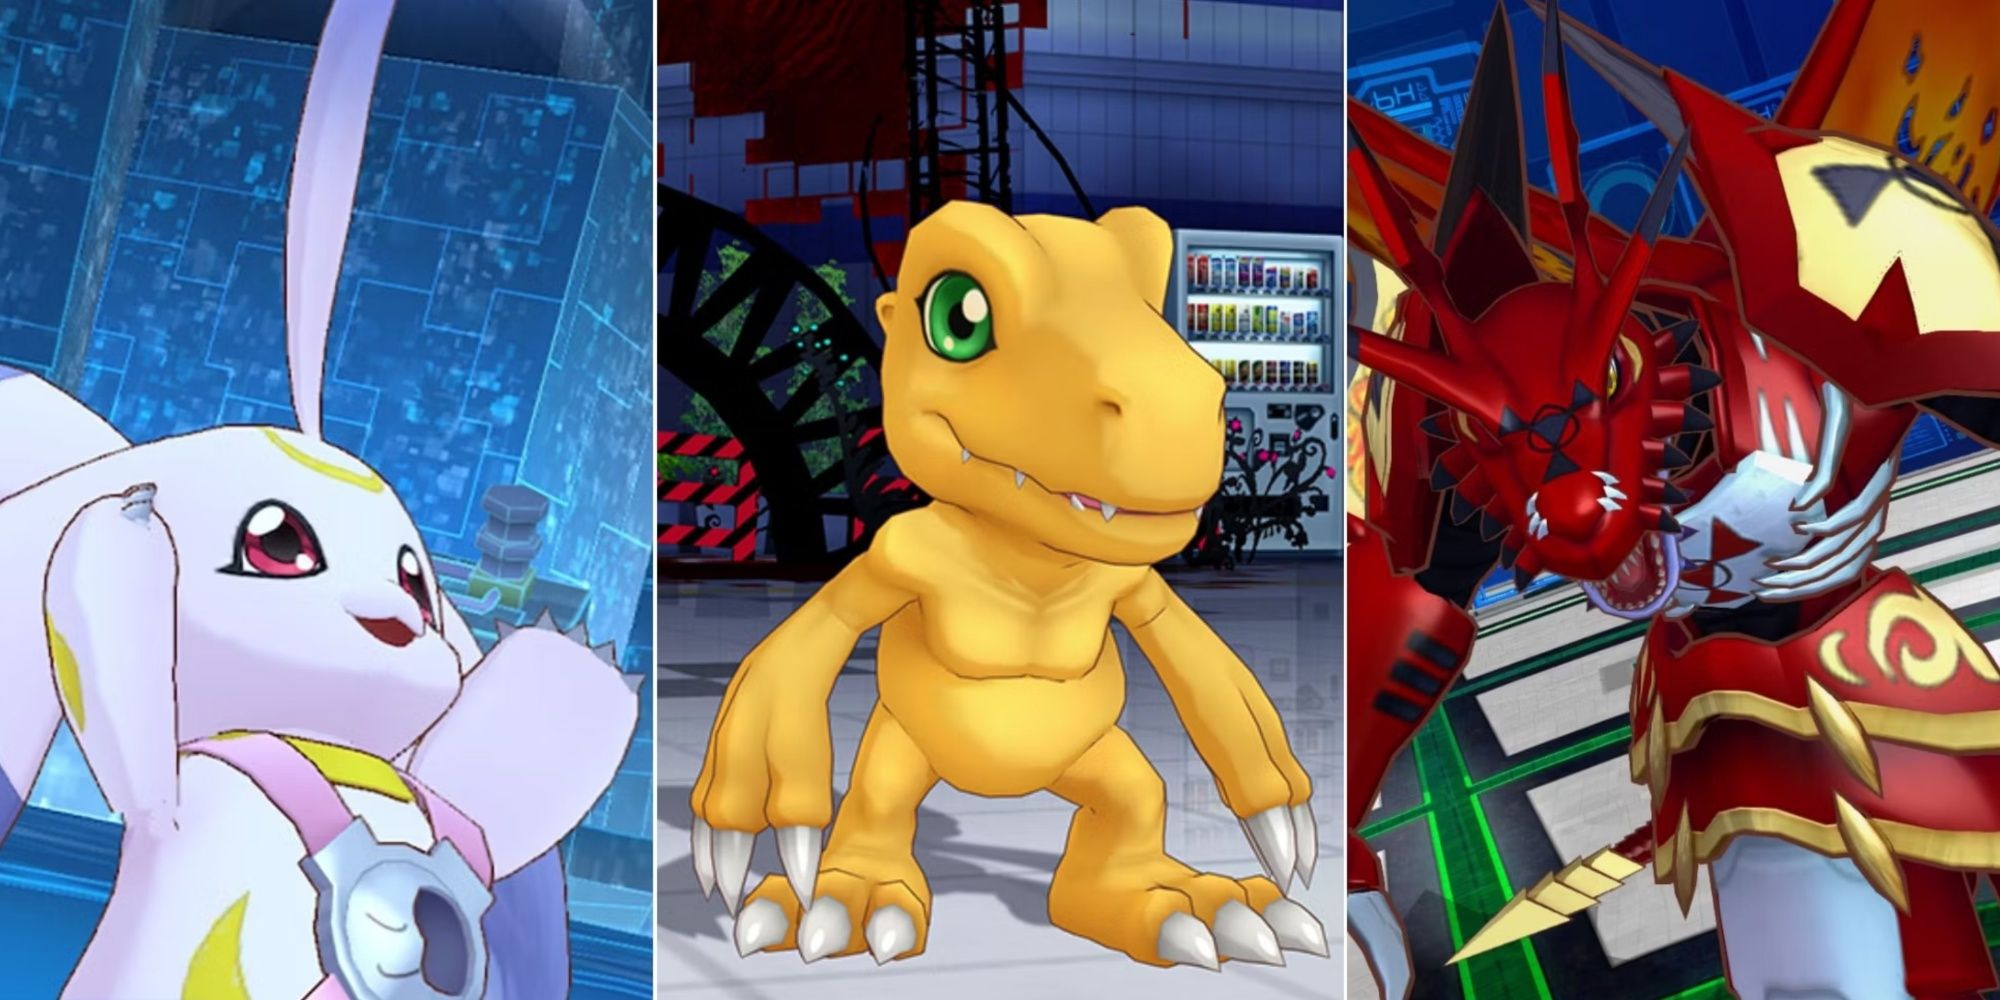 Three different digimon, including an Agumon, from Digimon Story Cyber Sleuth